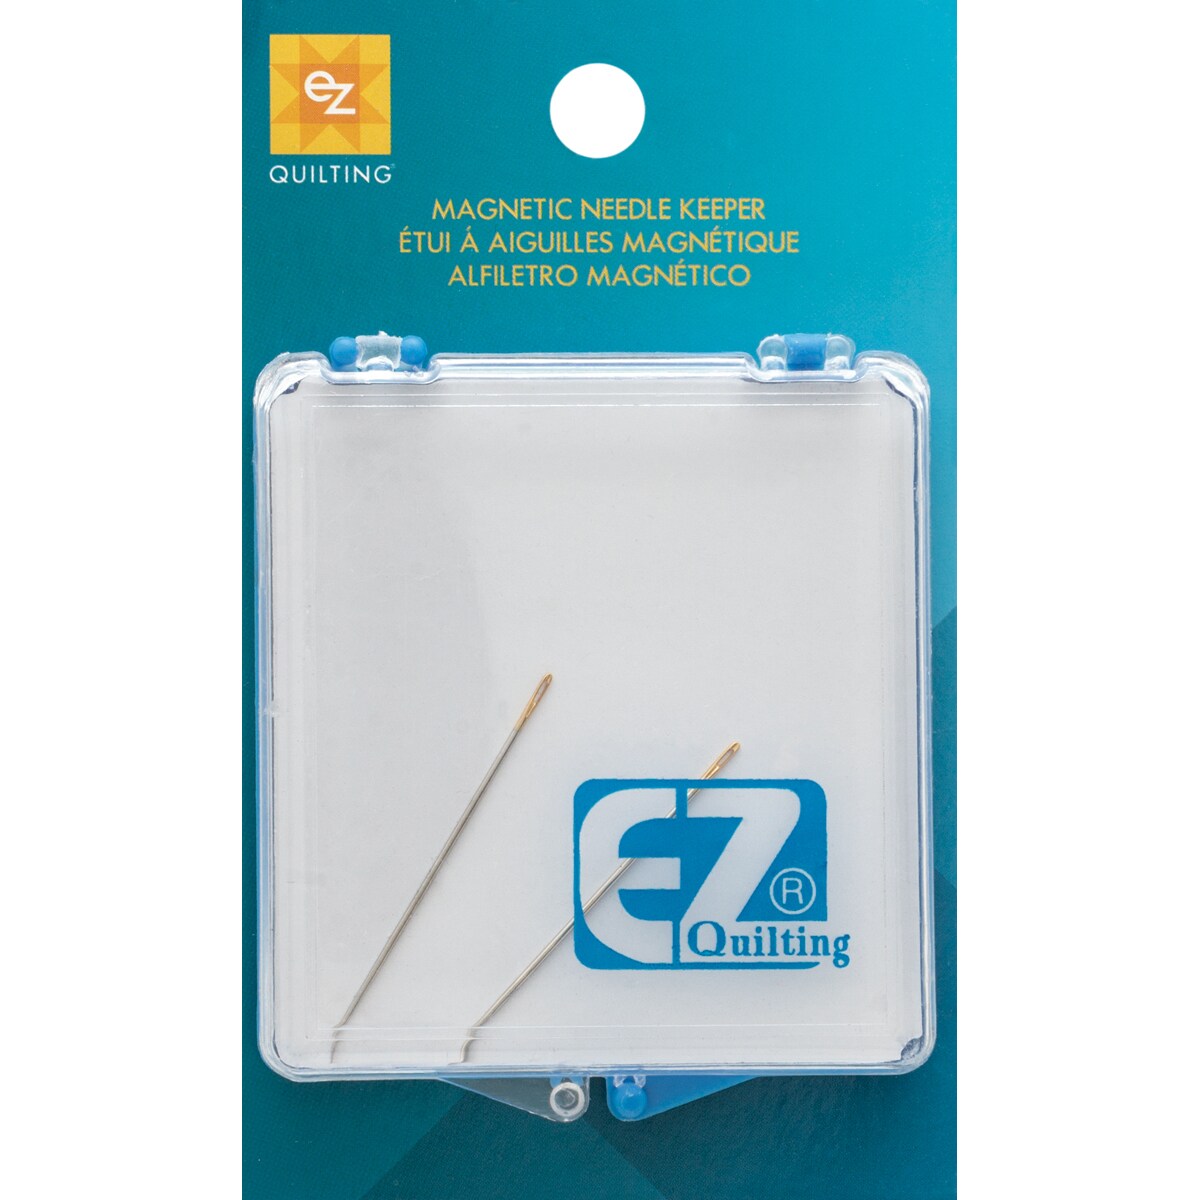 EZ Quilting Magnetic Needle Keeper-